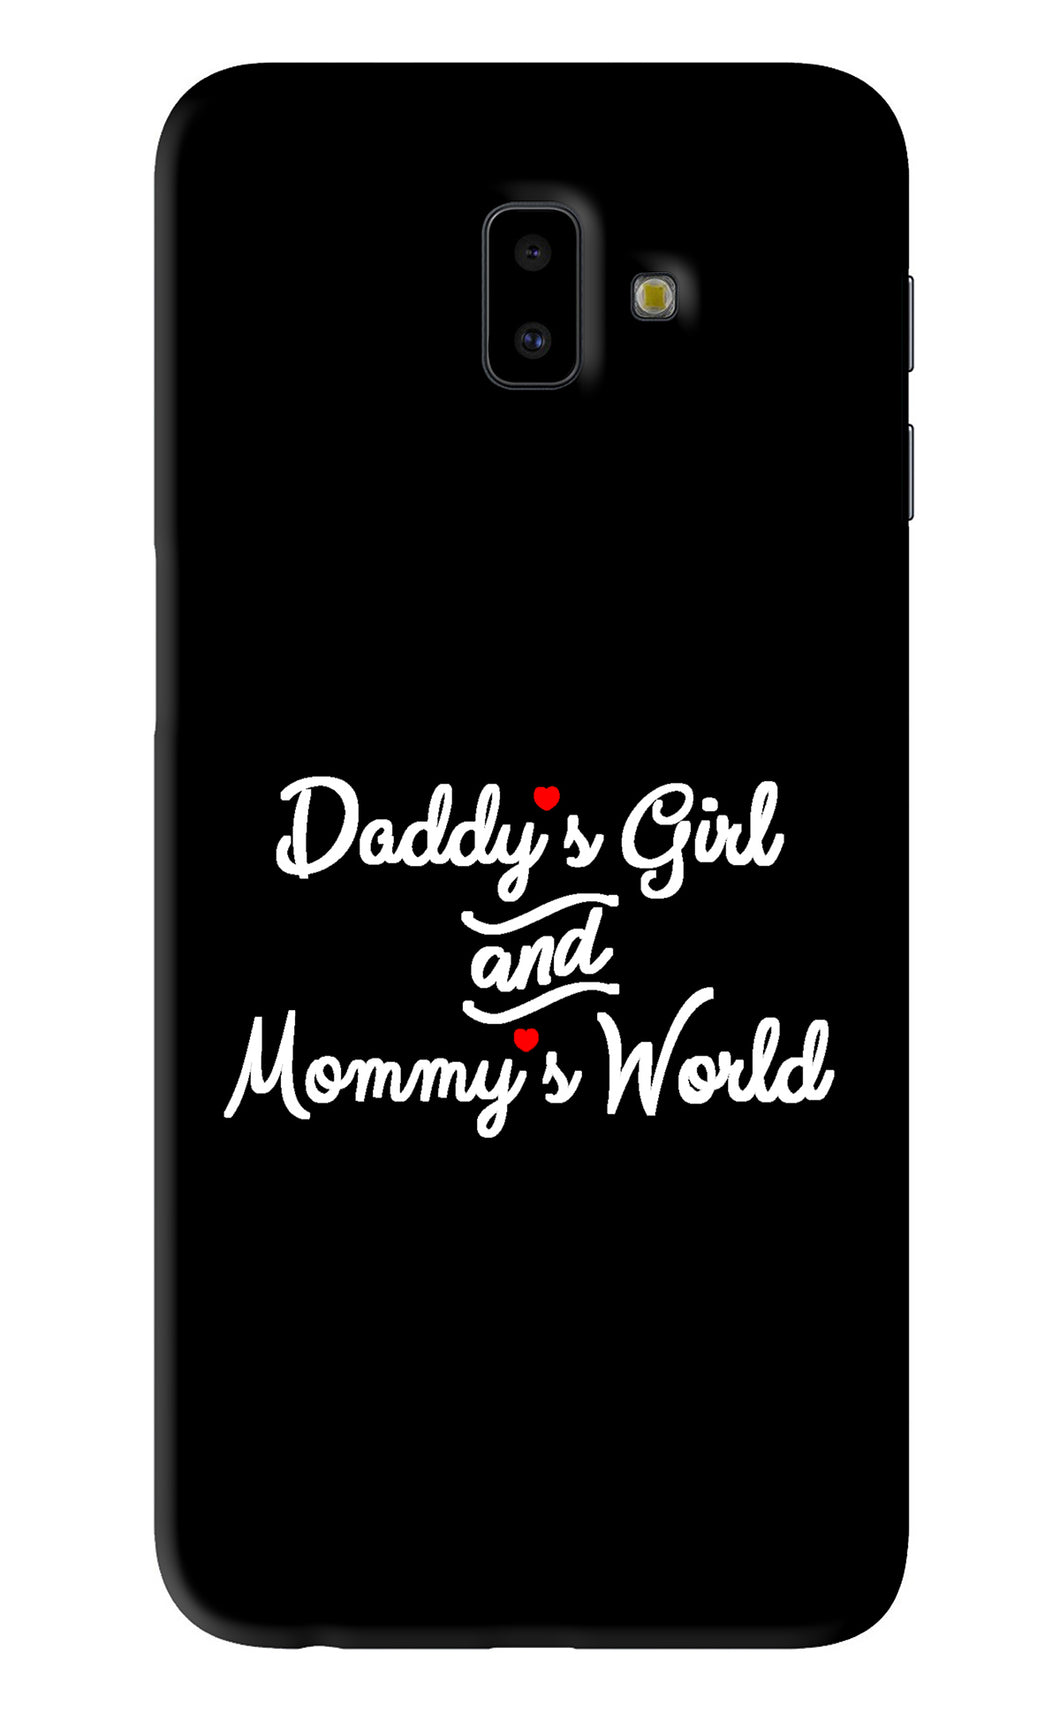 Daddy's Girl and Mommy's World Samsung Galaxy J6 Plus Back Skin Wrap